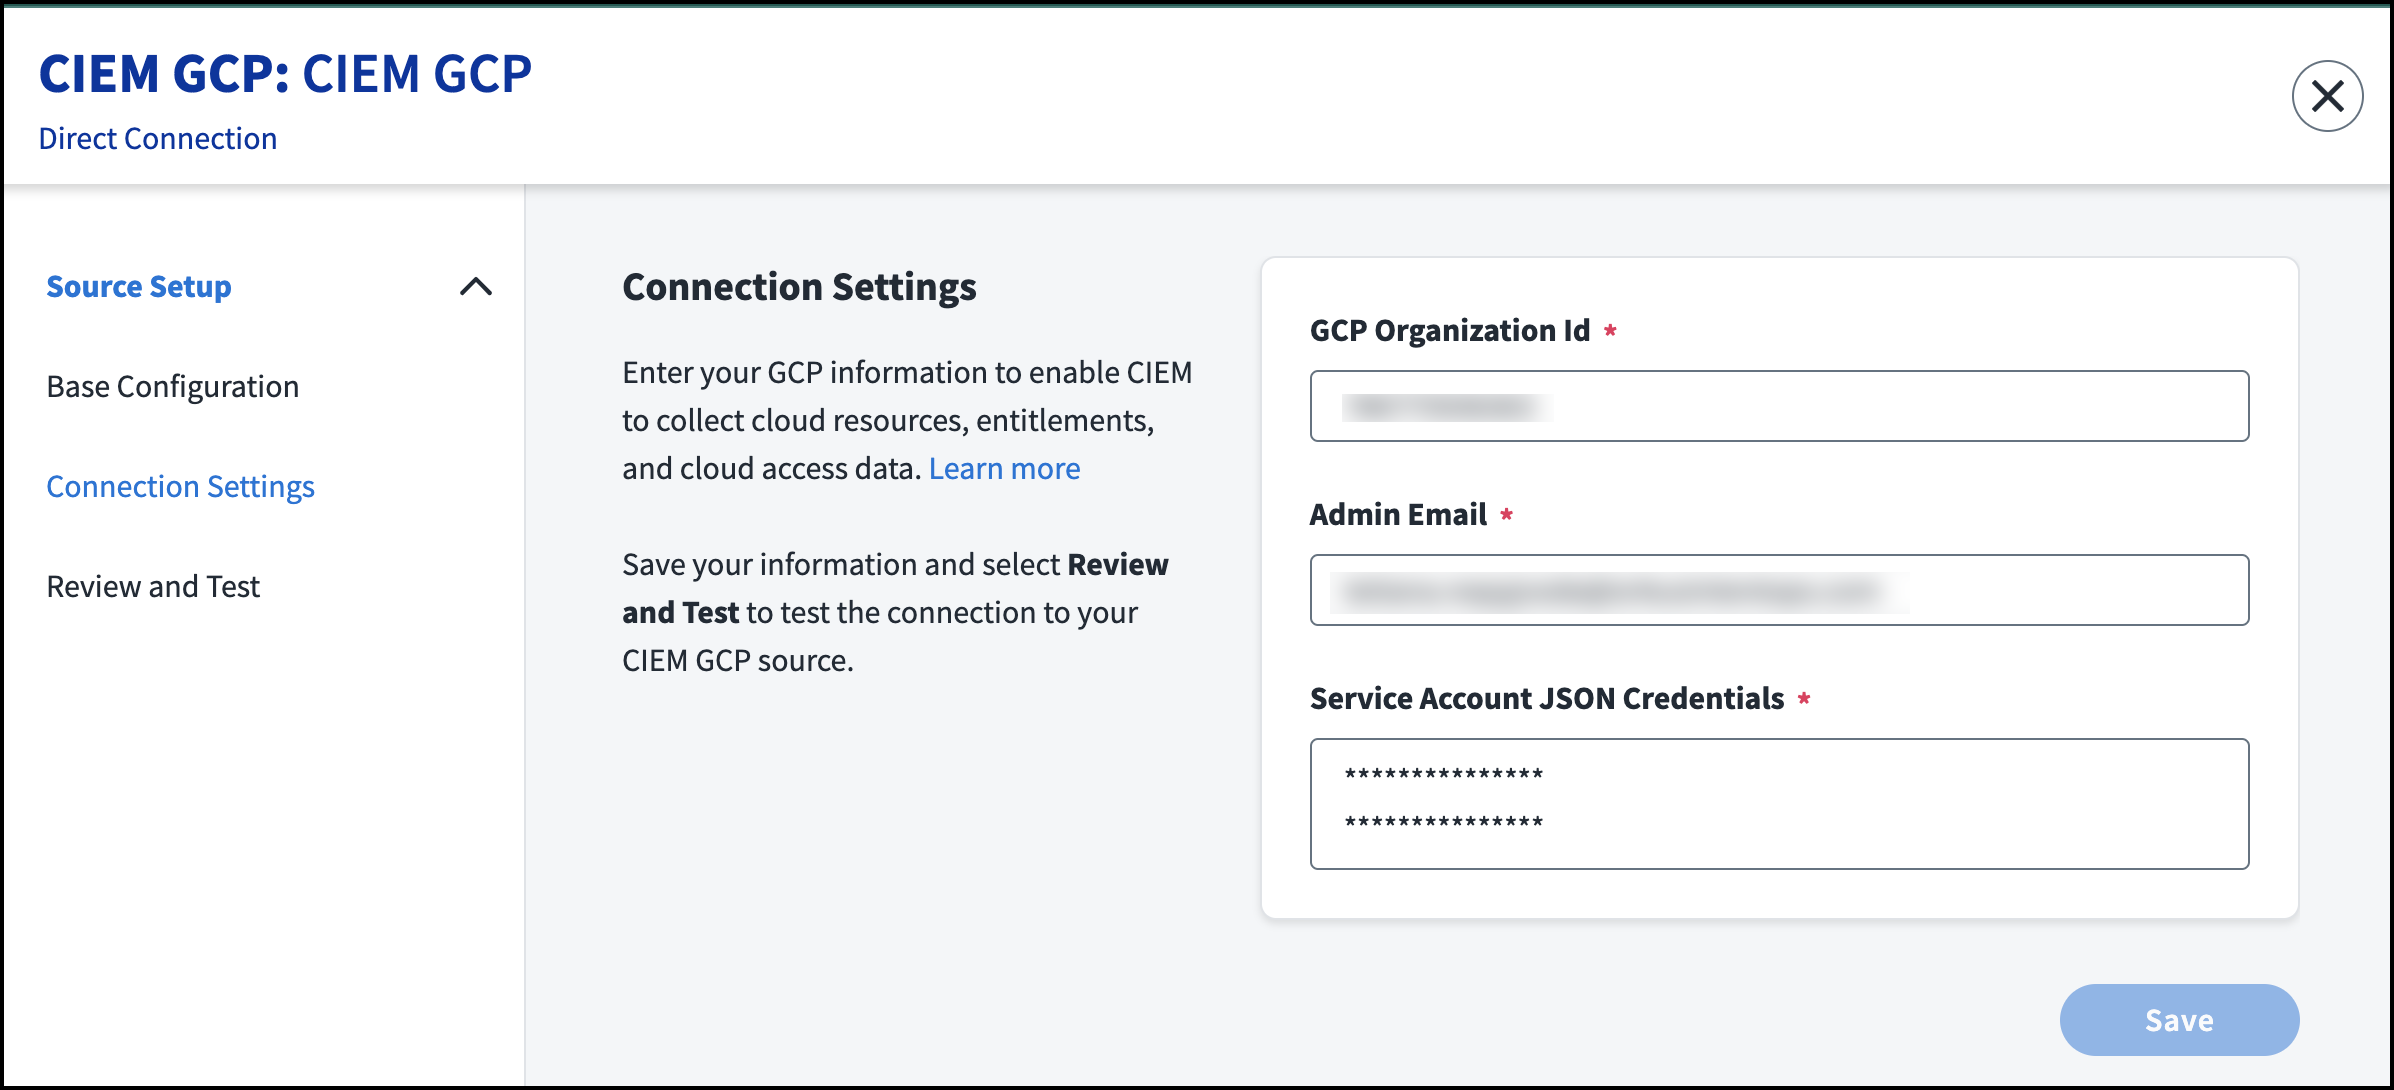 The C.I.E.M. G.C.P. connection settings are displayed with the org ID, admin email, and service account JSON credential fields.